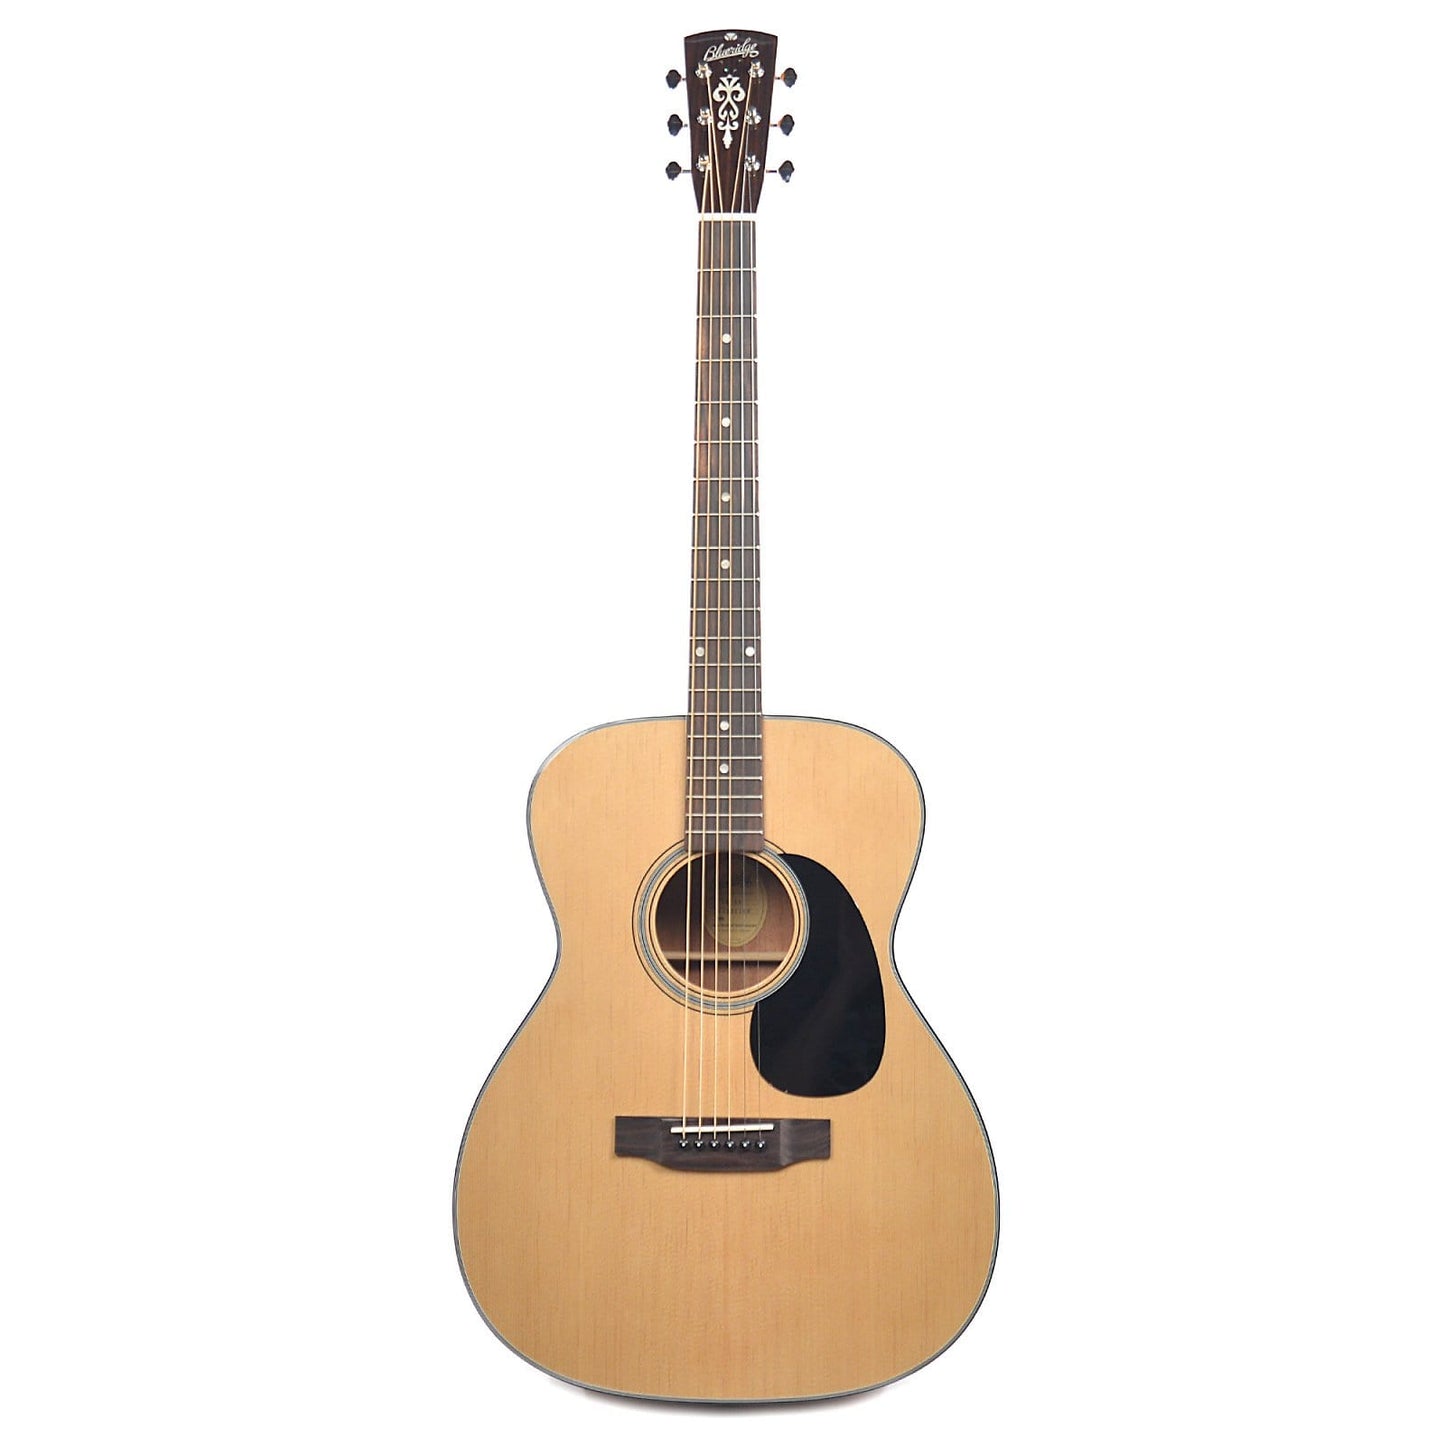 Blueridge BR-43 Contemporary 000 Sitka Spruce/Mahogany Natural Acoustic Guitars / OM and Auditorium